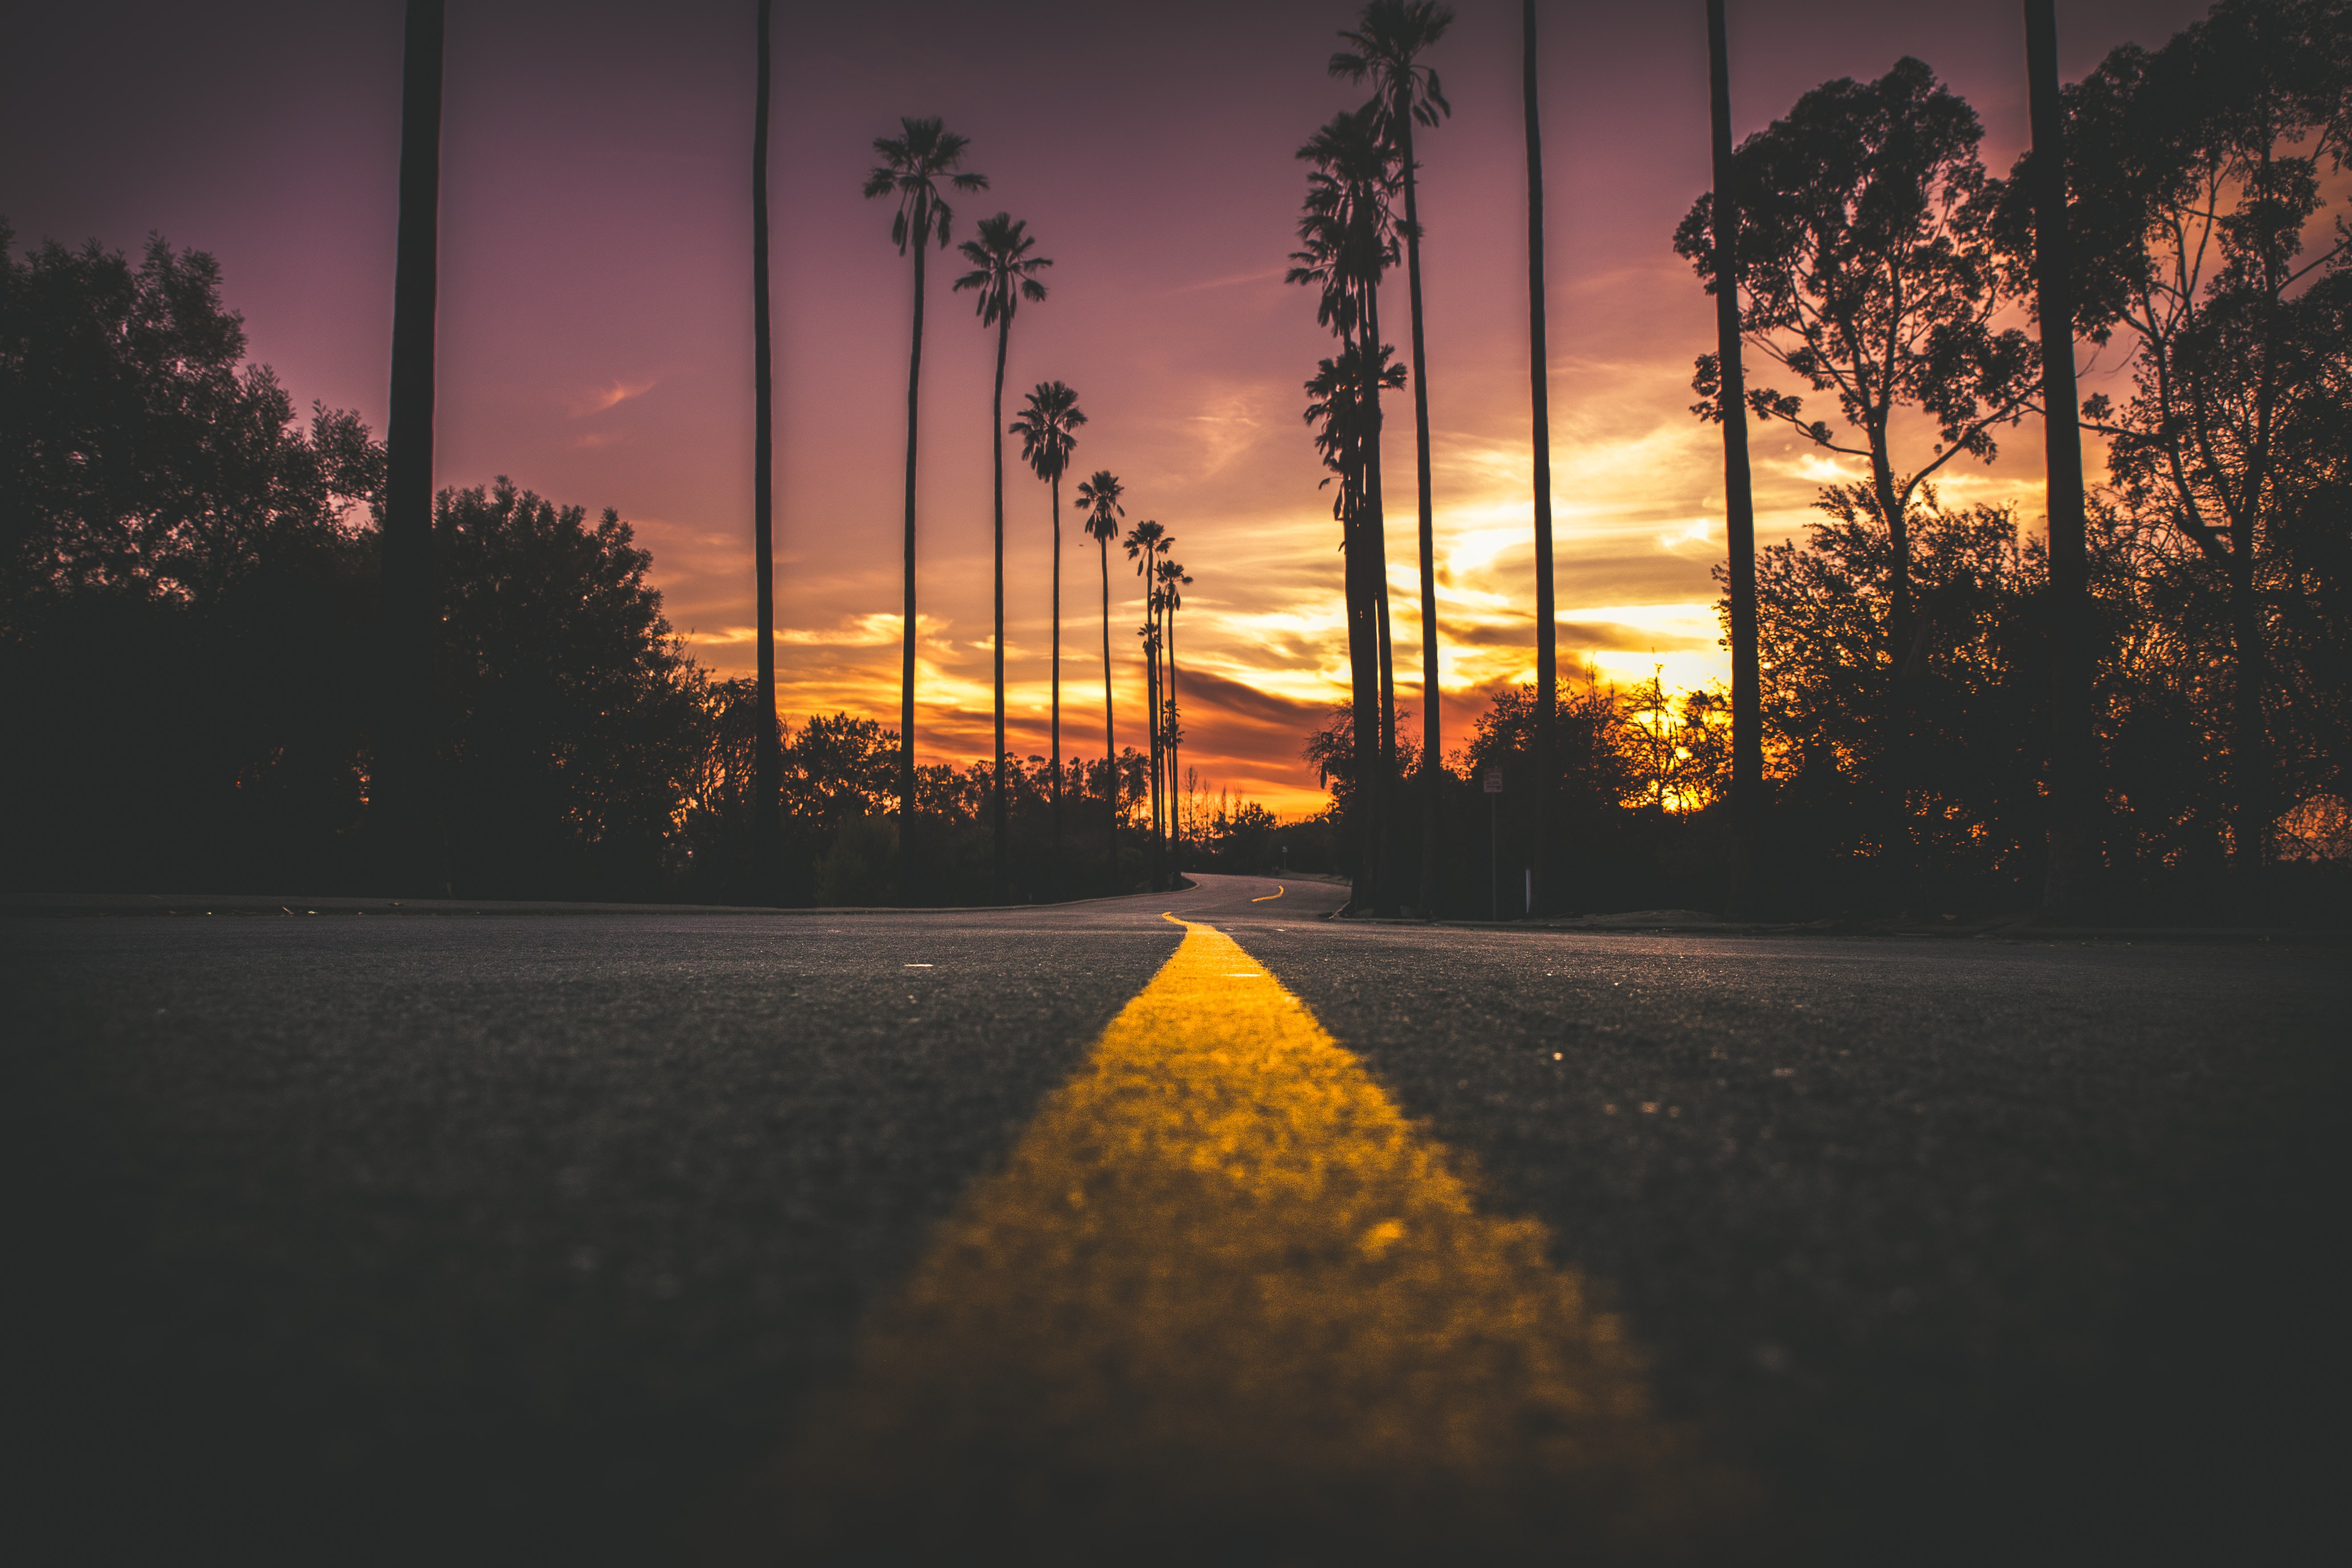 Road in city during sunset photo